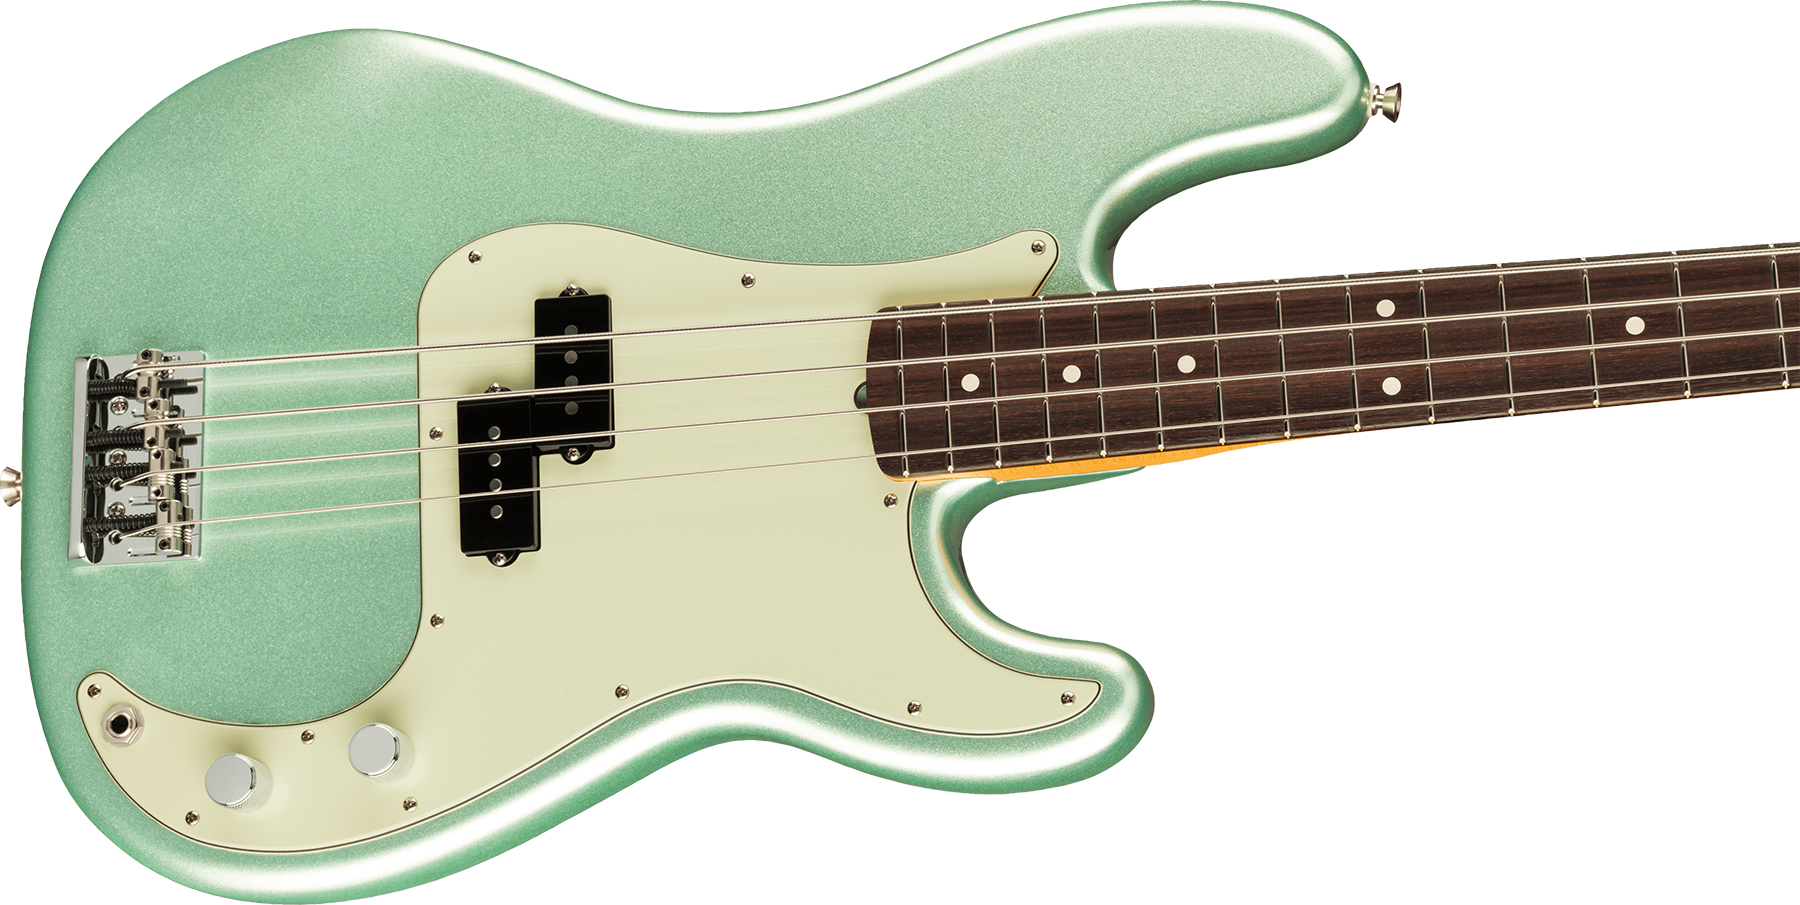 Fender Precision Bass American Professional Ii Usa Rw - Mystic Surf Green - Basse Électrique Solid Body - Variation 2